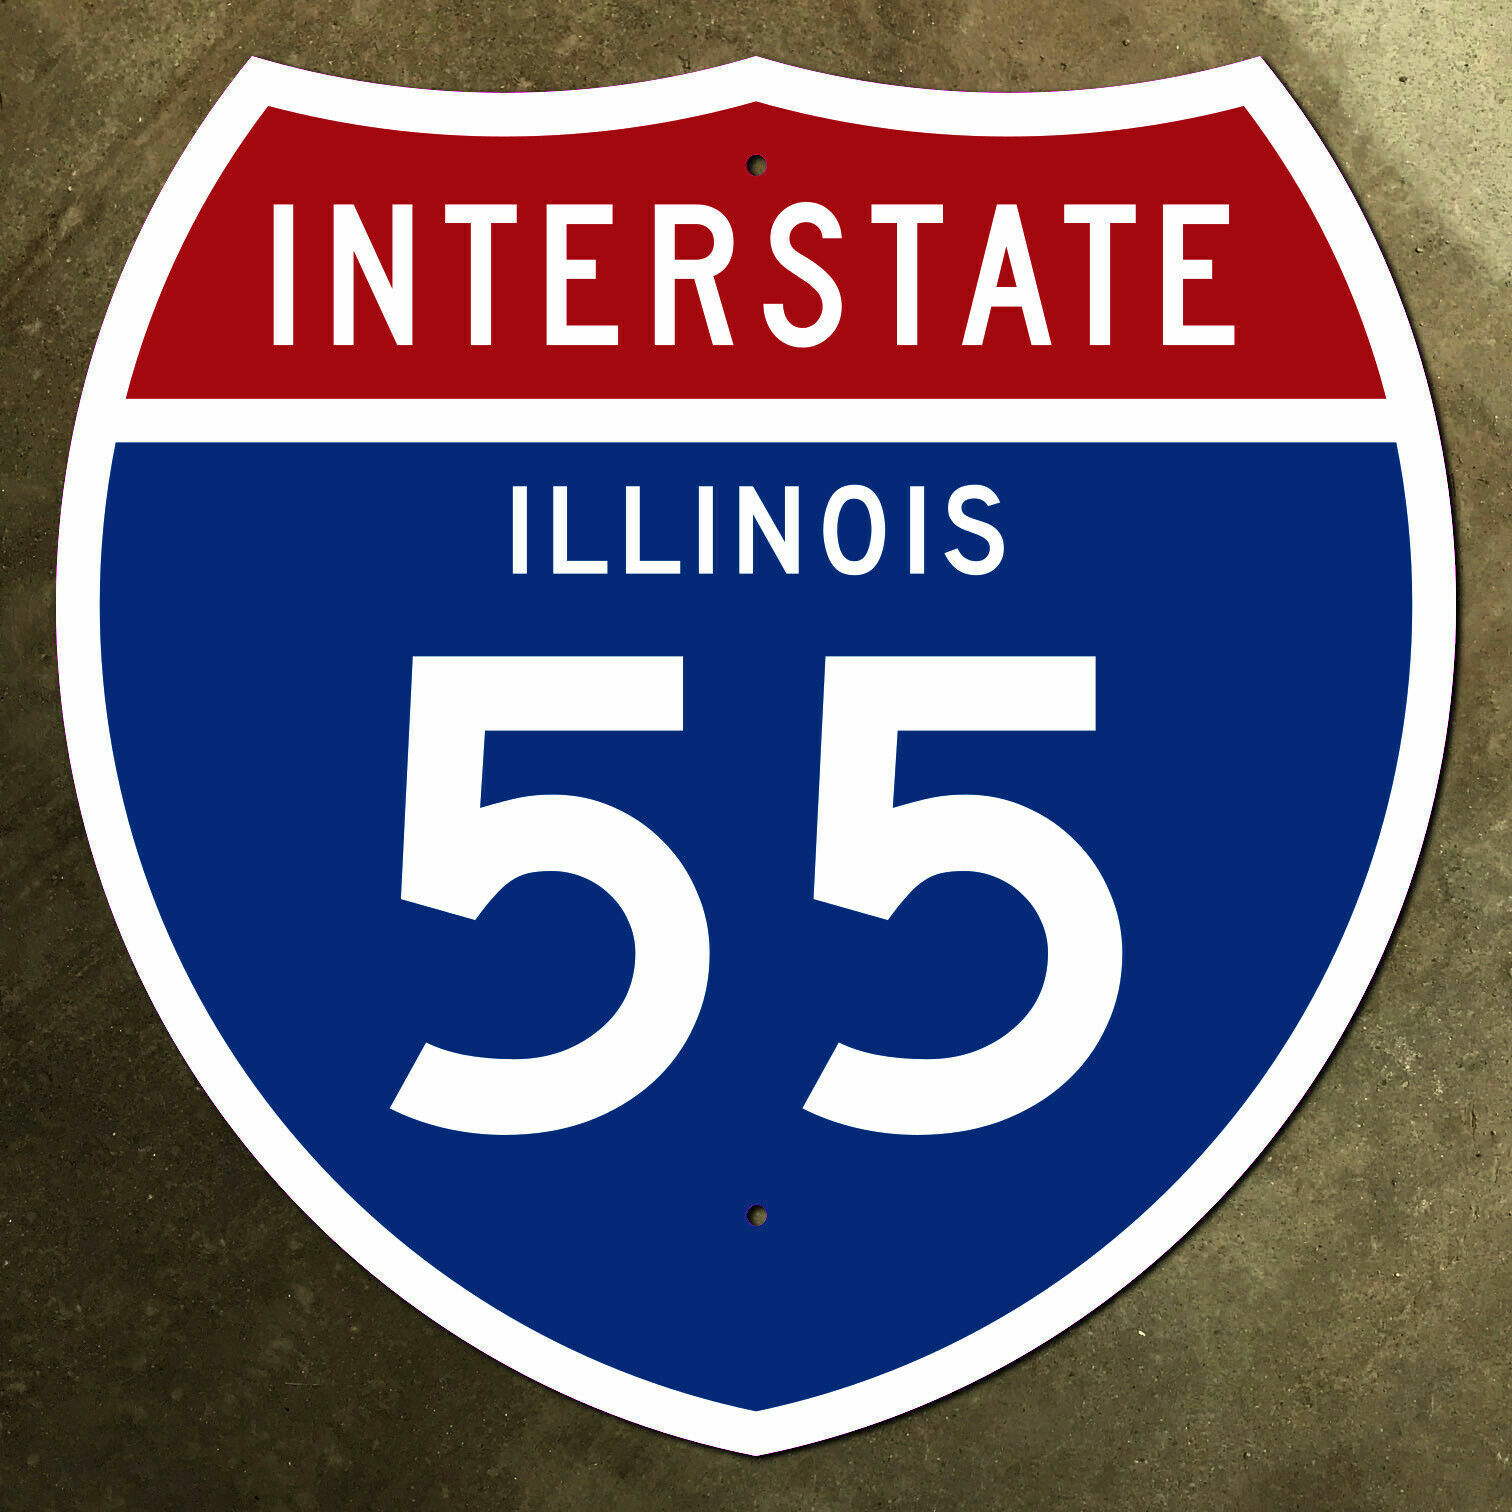 Illinois interstate route 55 highway marker road sign 12x12 Chicago US 66